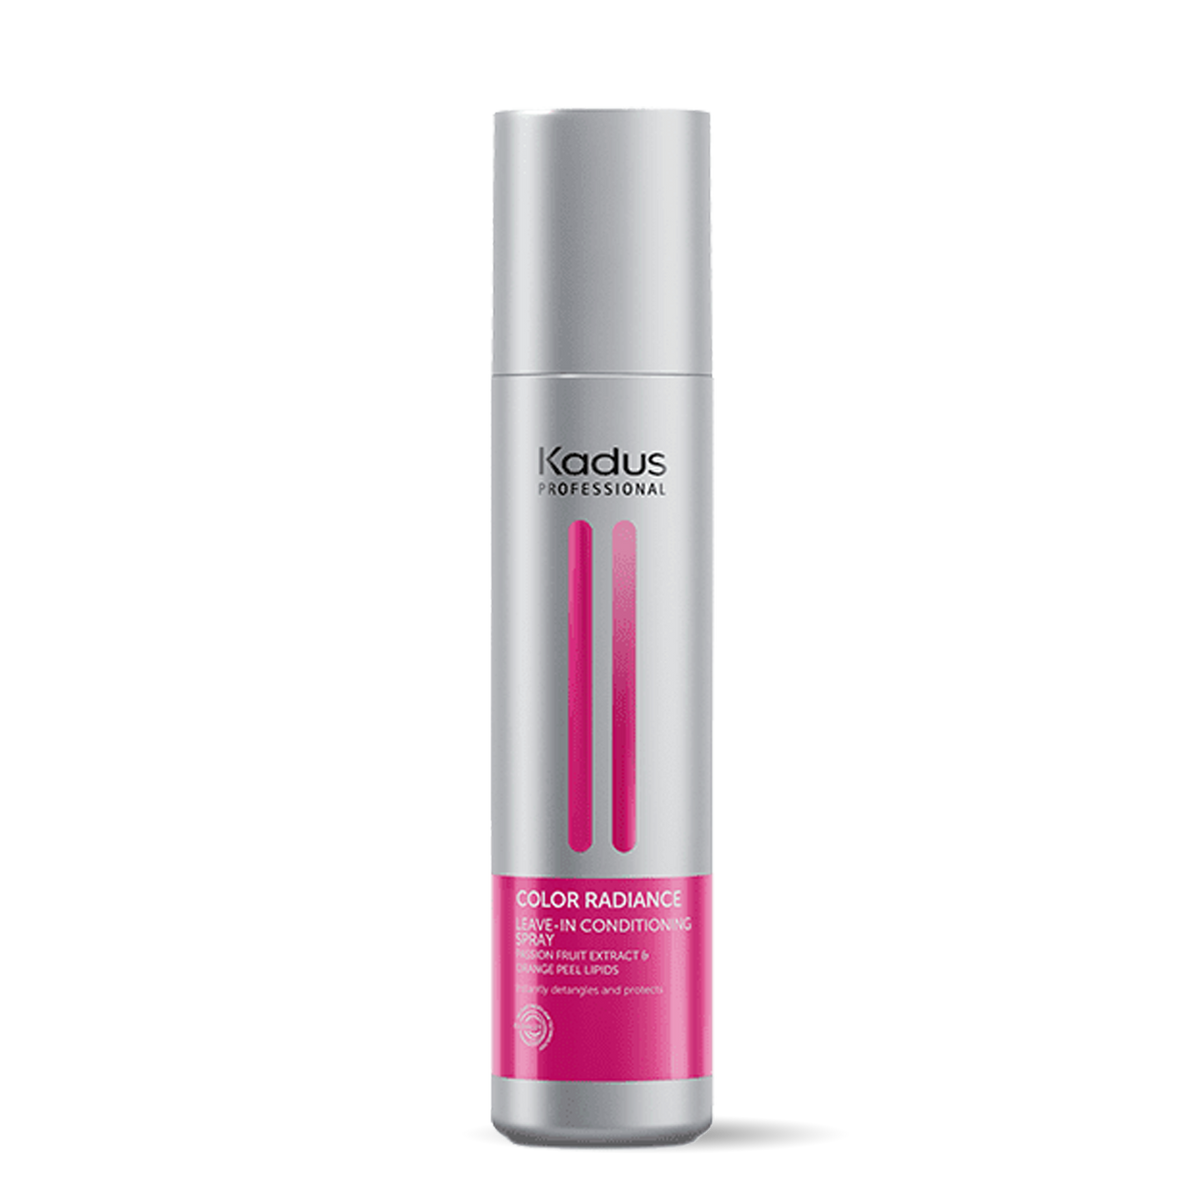 Kadus Color Radiance Conditioning Spray 250ml - by Kadus Professionals |ProCare Outlet|